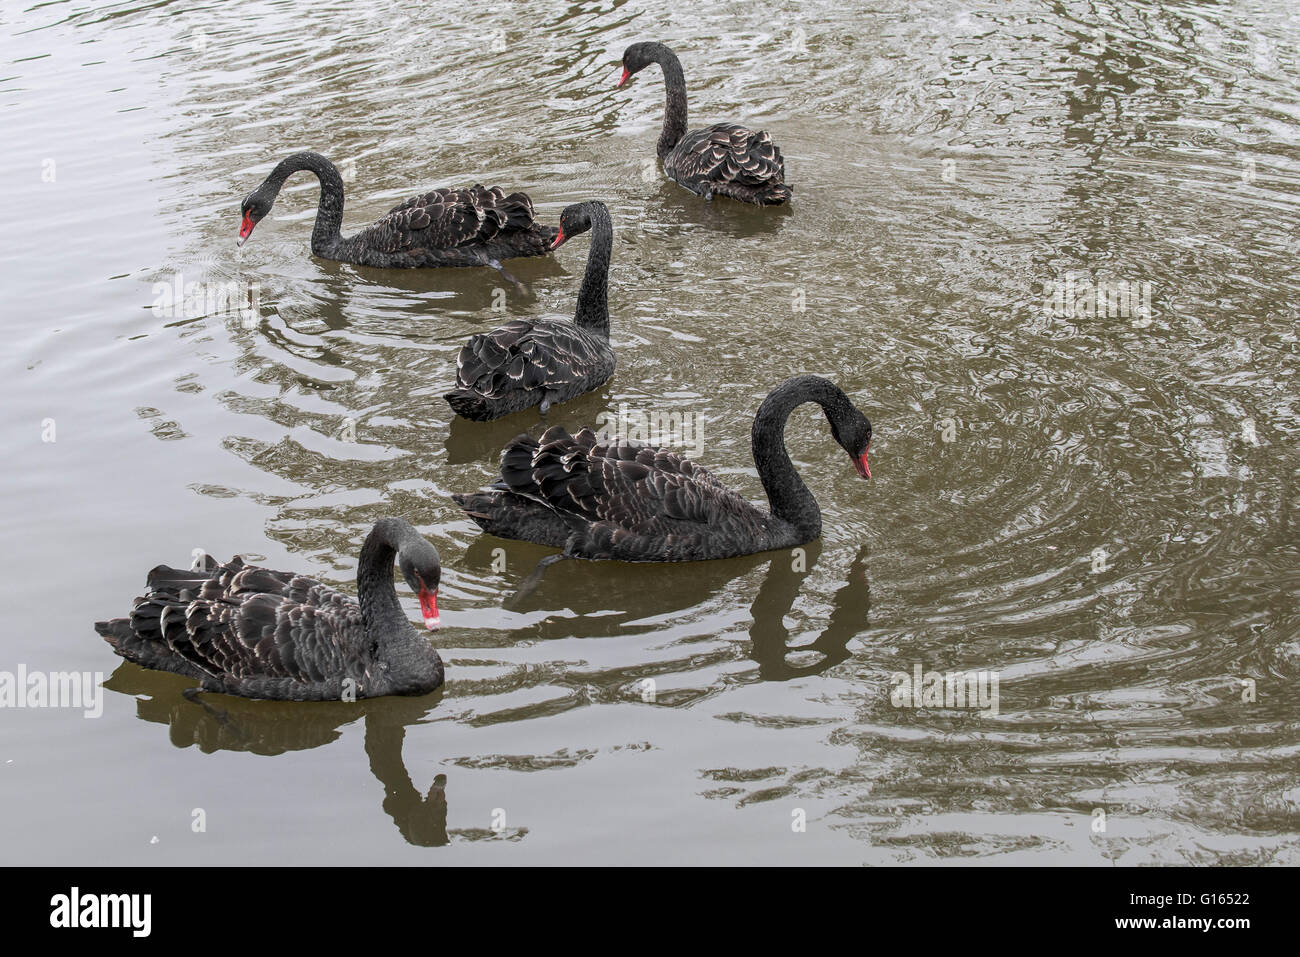 Trenance Lake, Newquay, Cornwall, UK. 10th May, 2016. Five beautiful Black swans make an extremely rare and surprising visit to Trenance Lake in Newquay, Cornwall.  Credit: Gordon Scammell/Alamy Live News Stock Photo